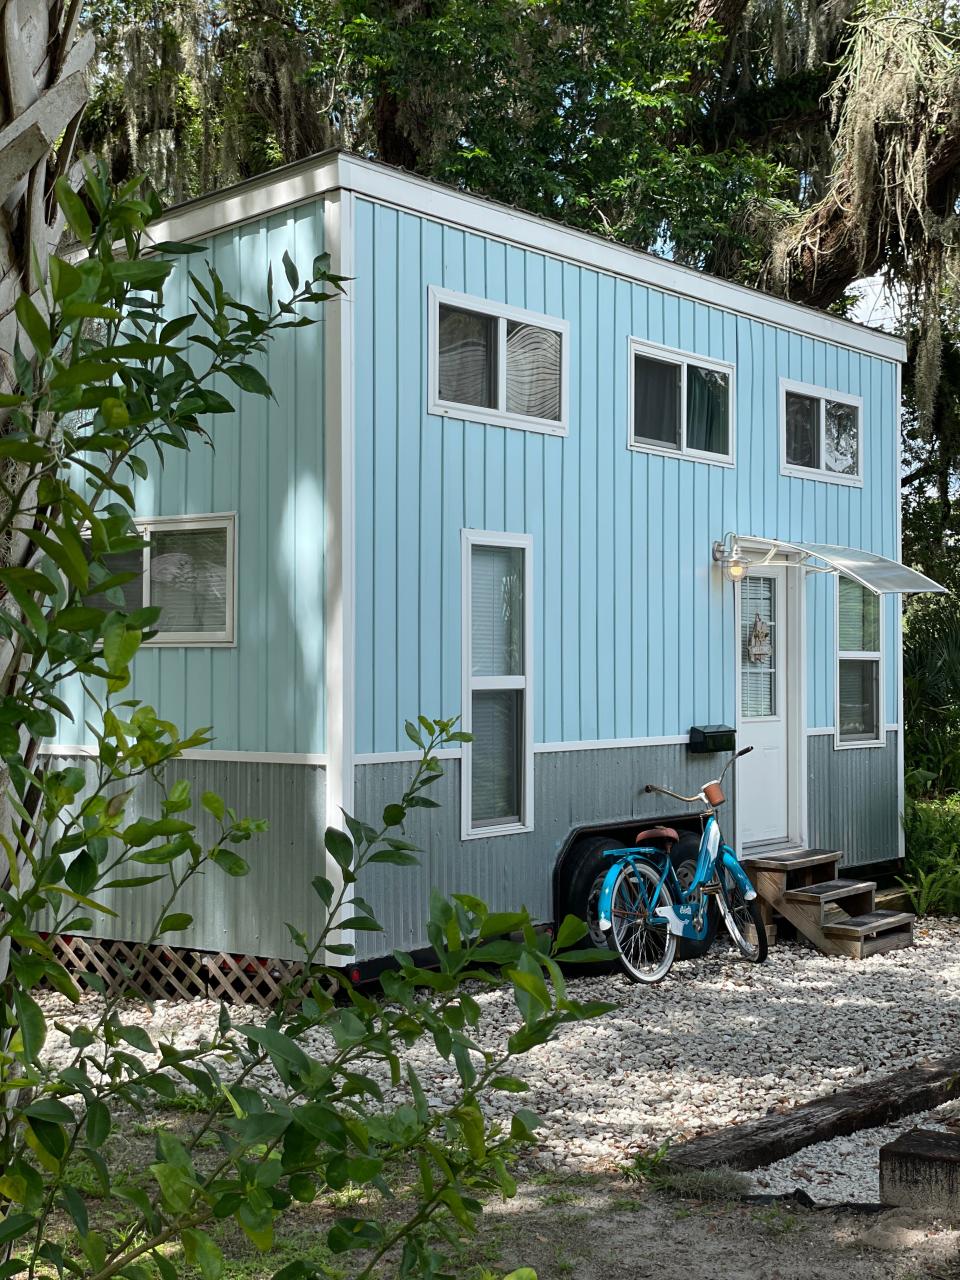 Crystal O’Mara’s tiny home rental in Chuluota, Fla., has easy-access parking just steps from the entrance.